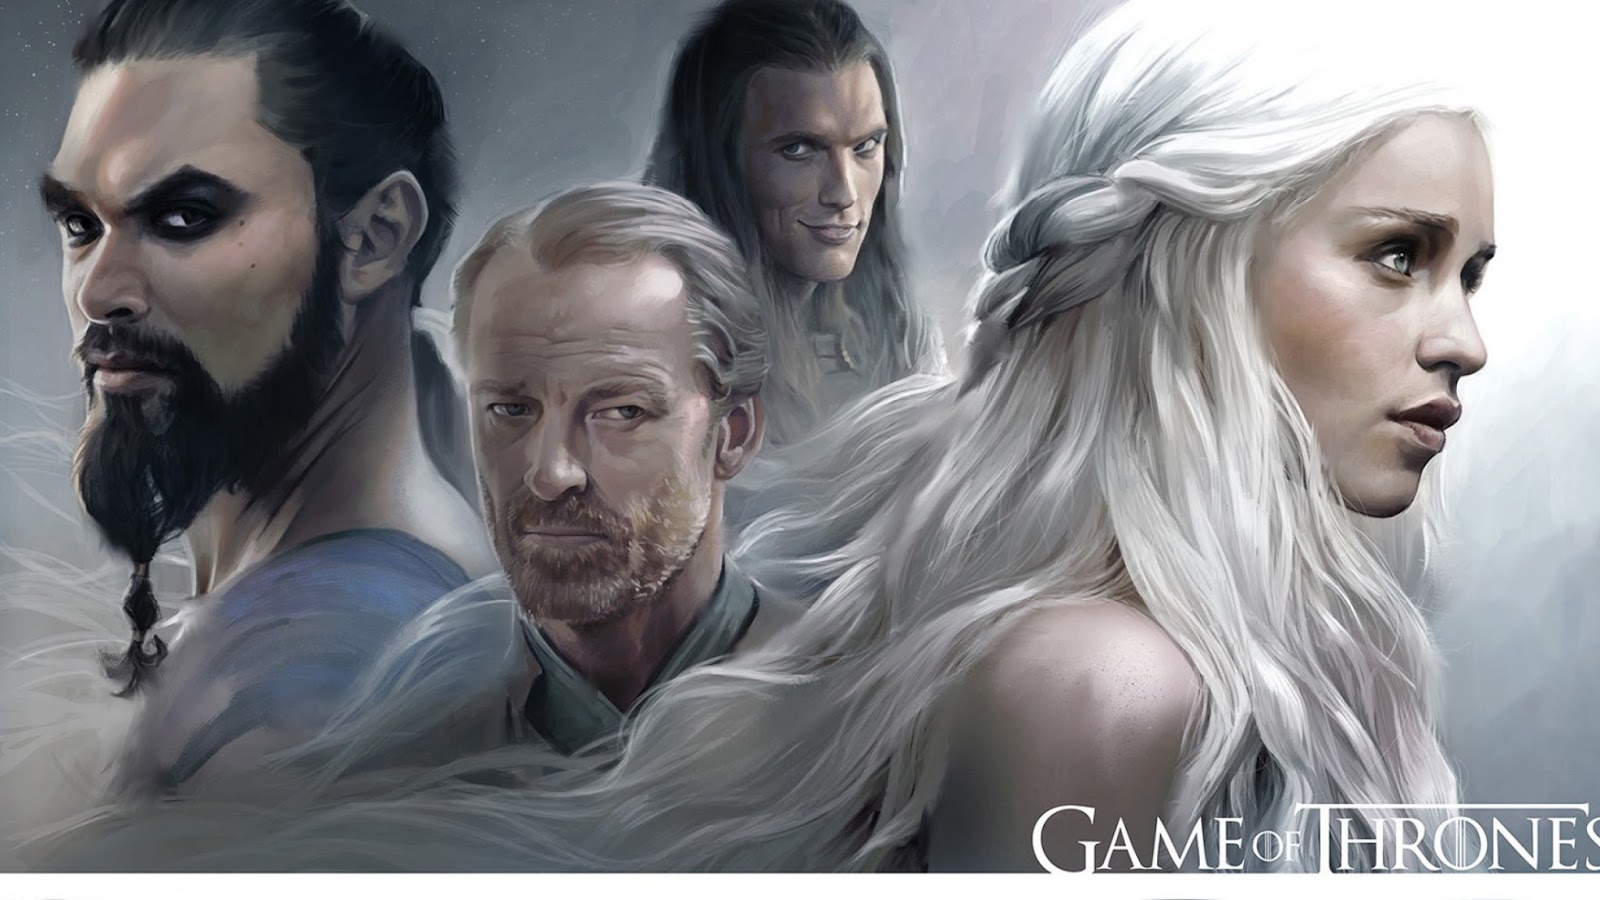 70 Hd Game Of Thrones Wallpapers Season 1 To 8 2019 Topibestlist